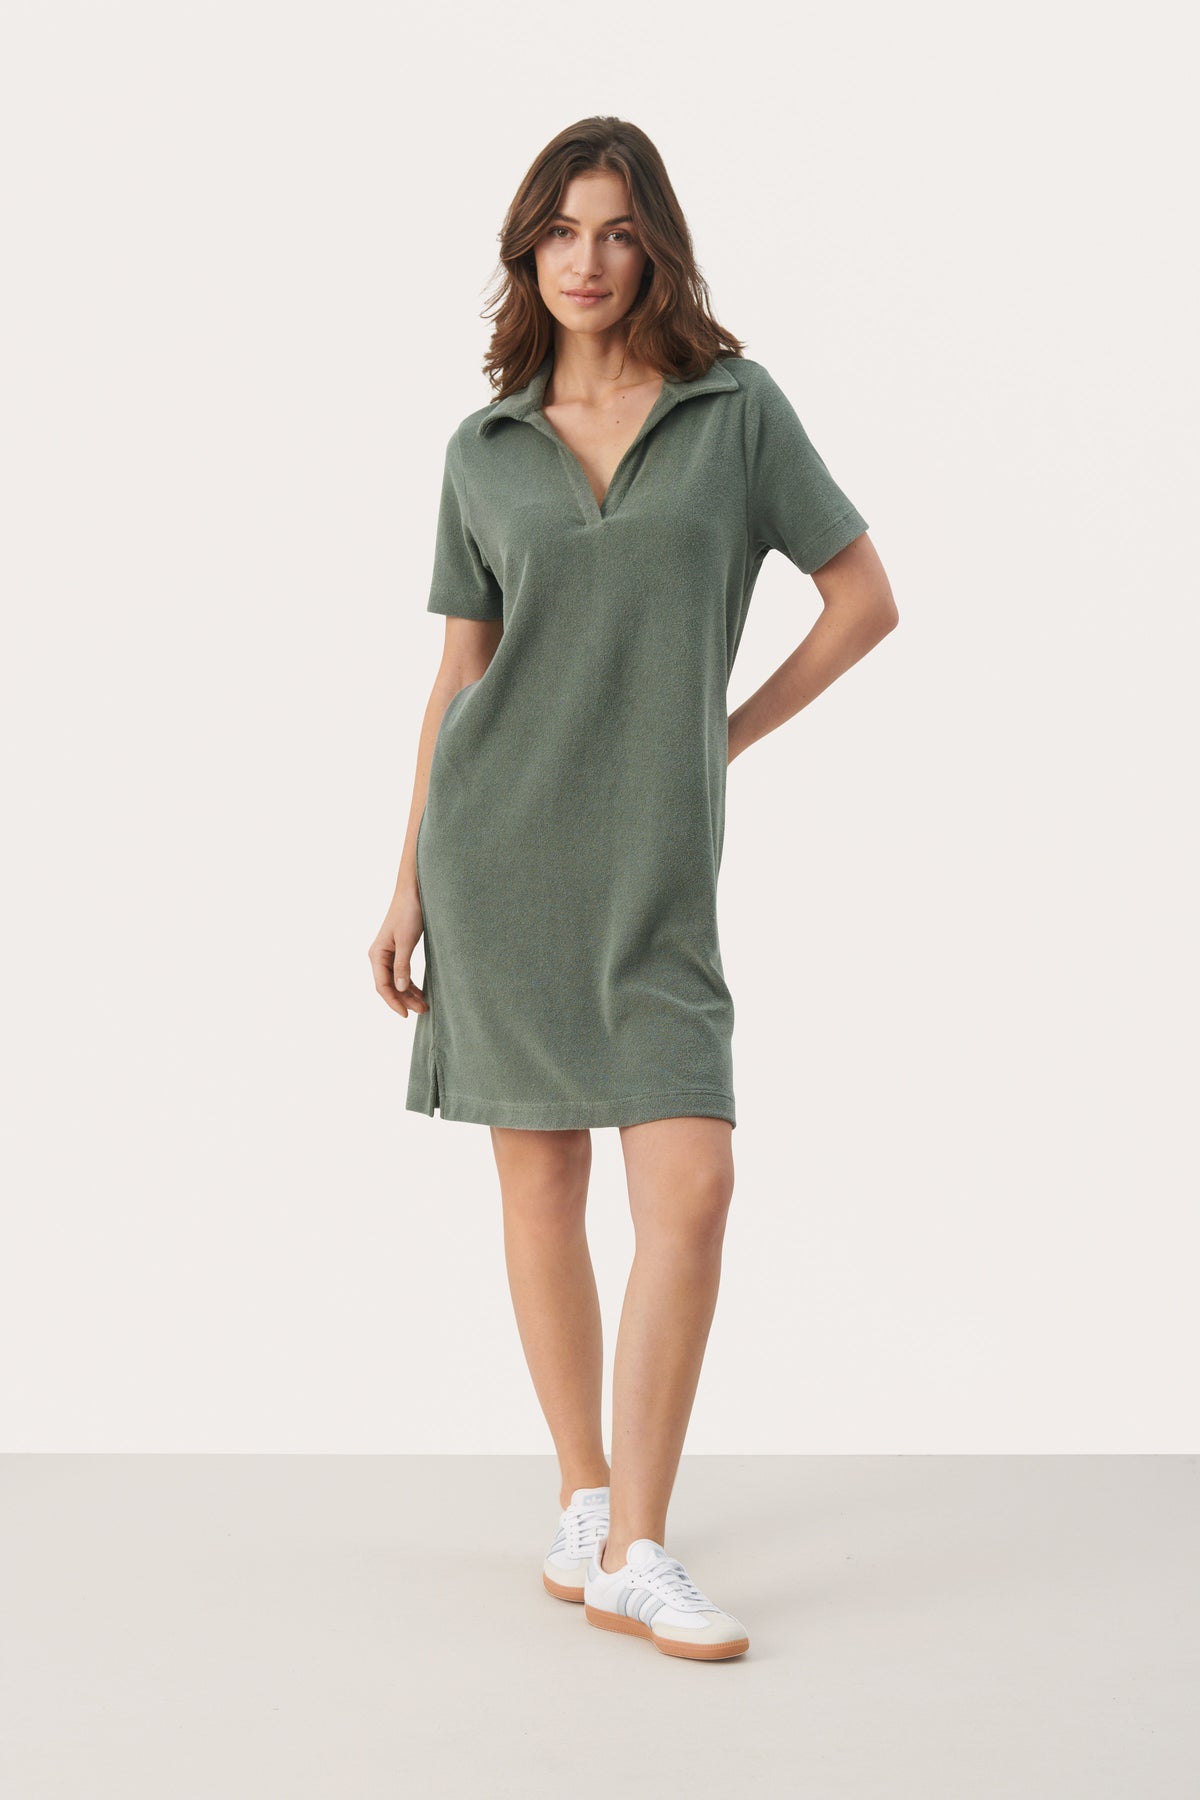 30308658 Agave Green Part Two Giavanna Dress